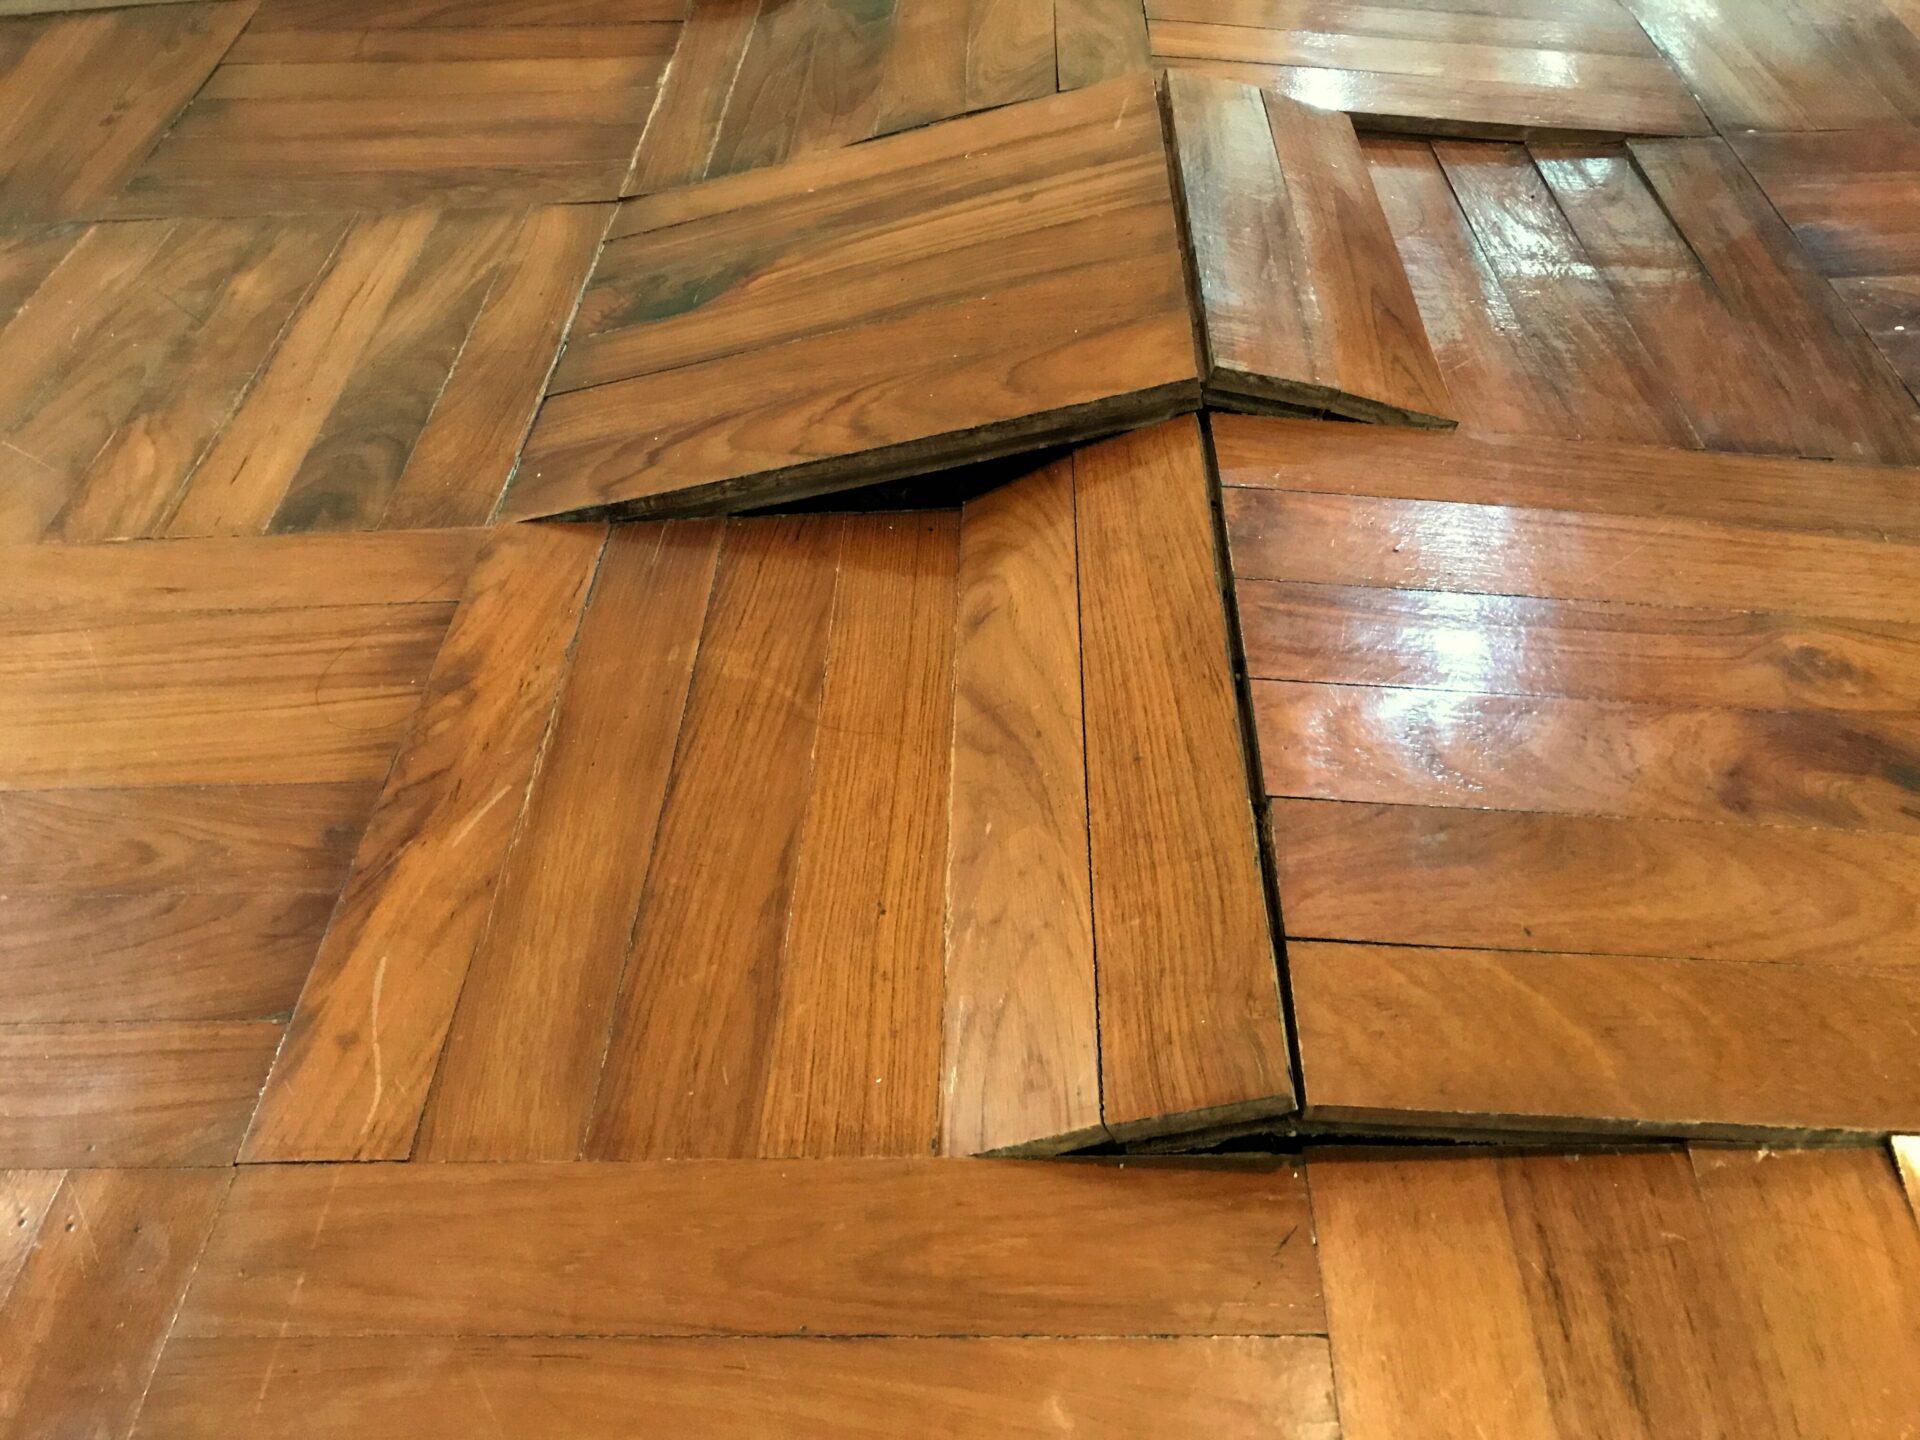 A close-up of a parquet wooden floor with a section raised and damaged, indicating a need for repair.